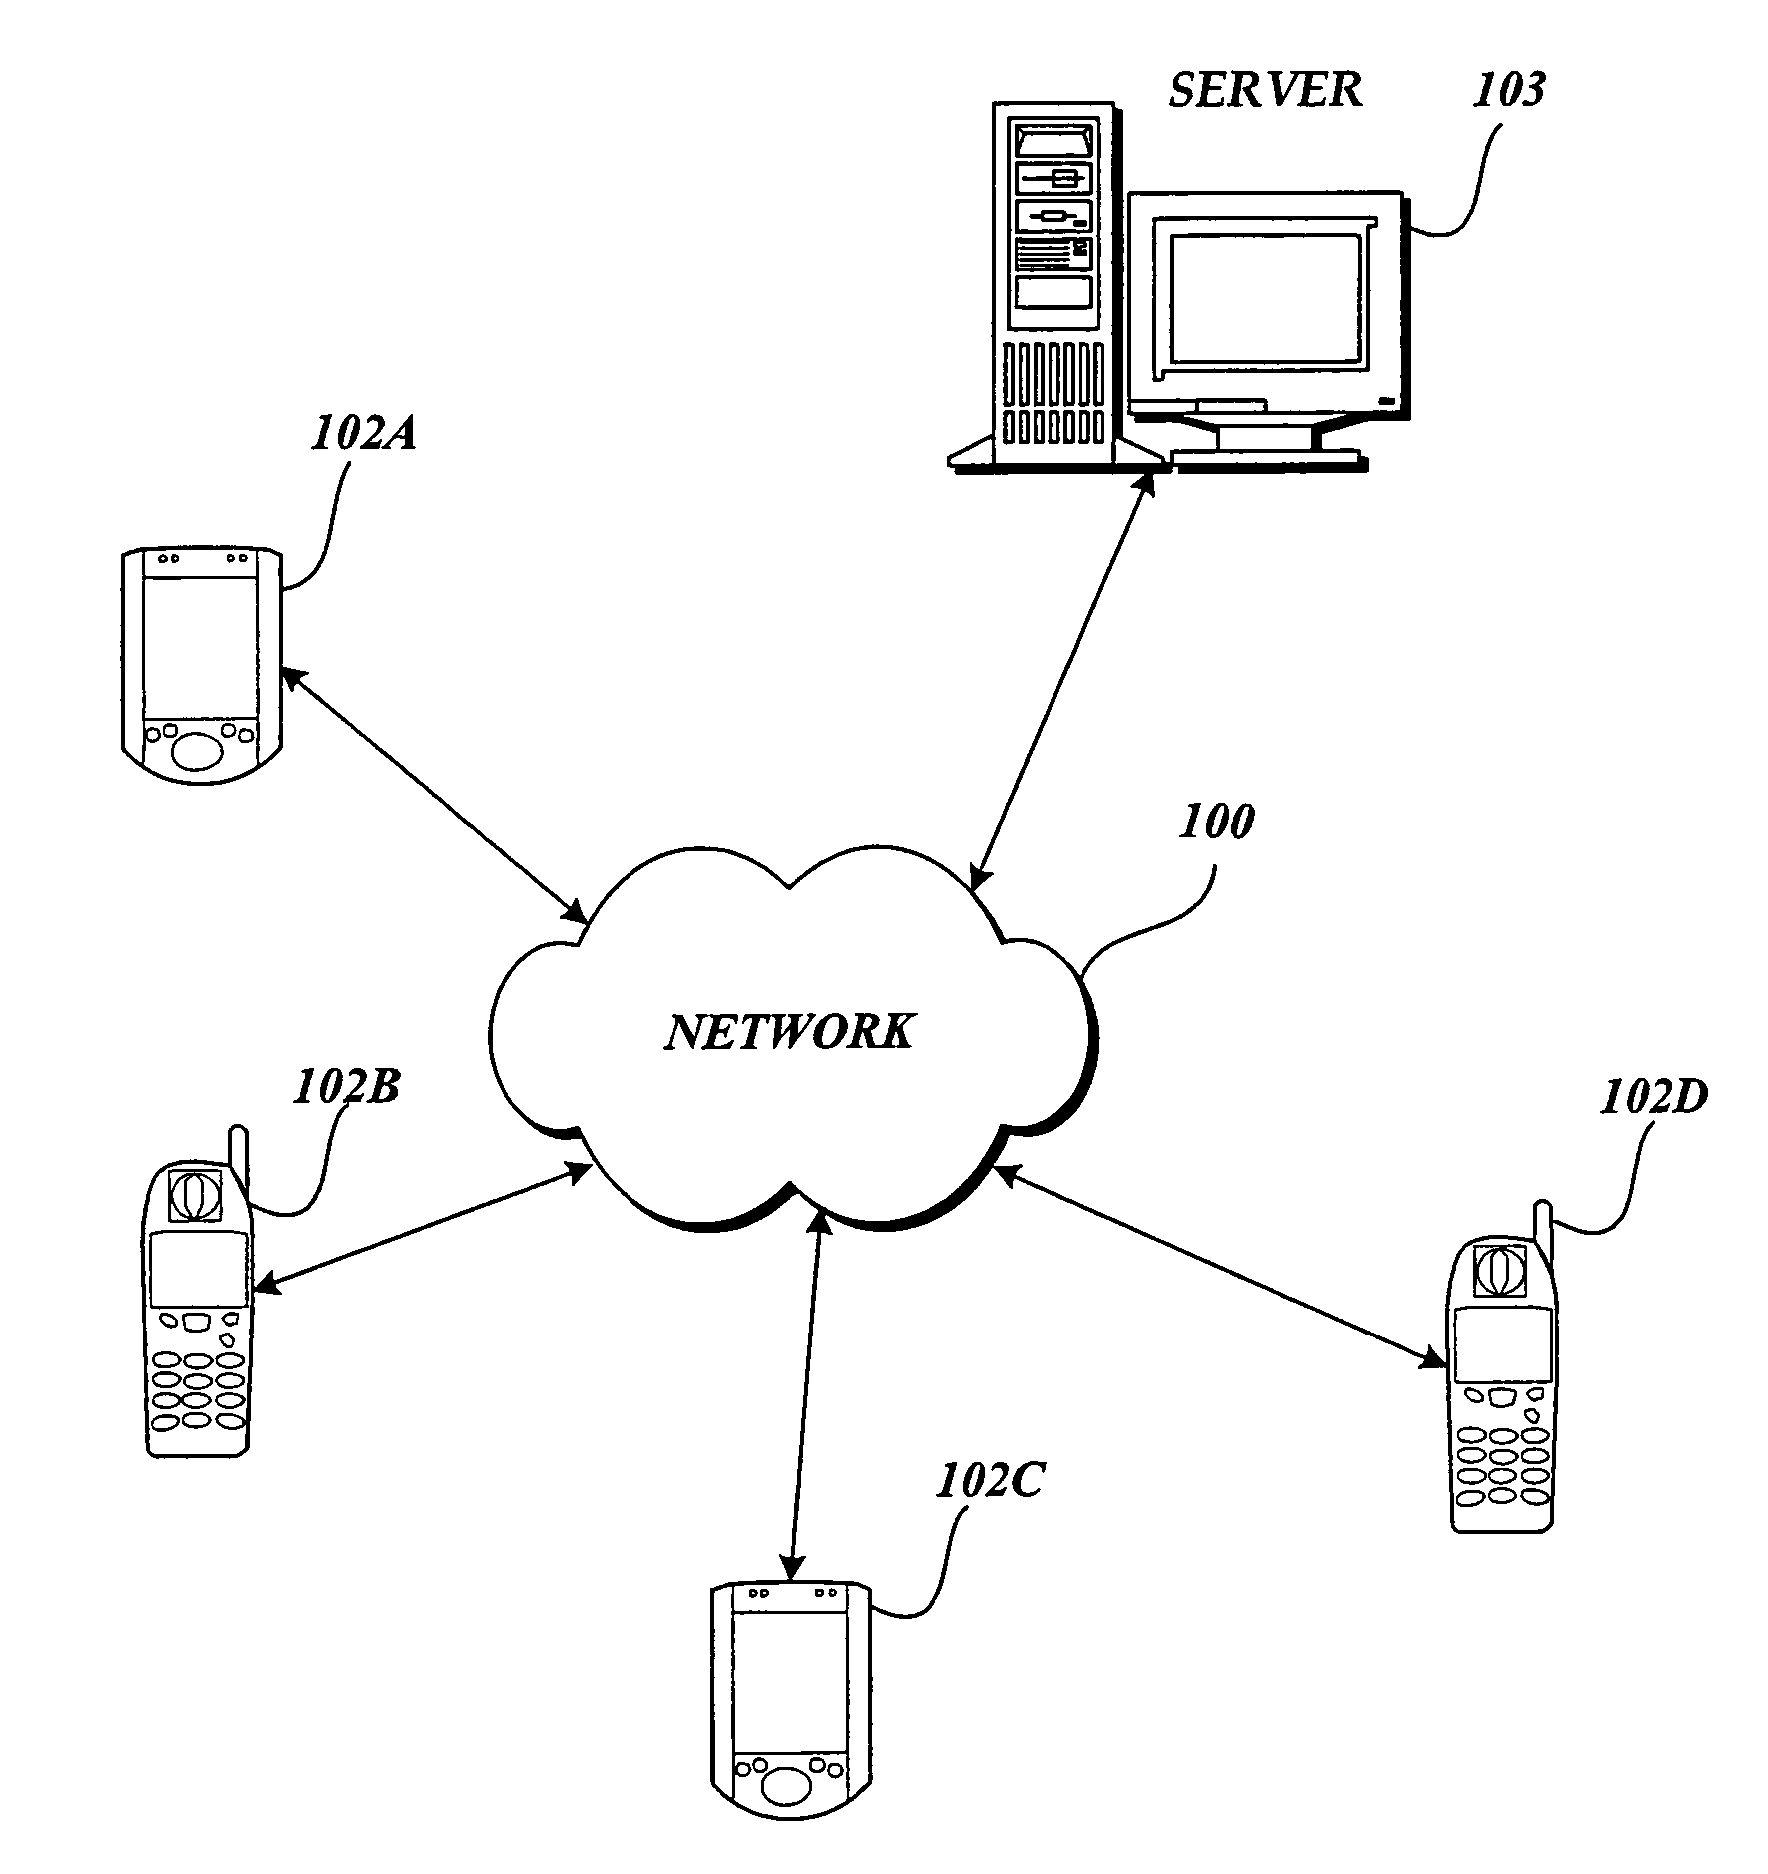 System and method for obtaining information relating to an item of commerce using a portable imaging device